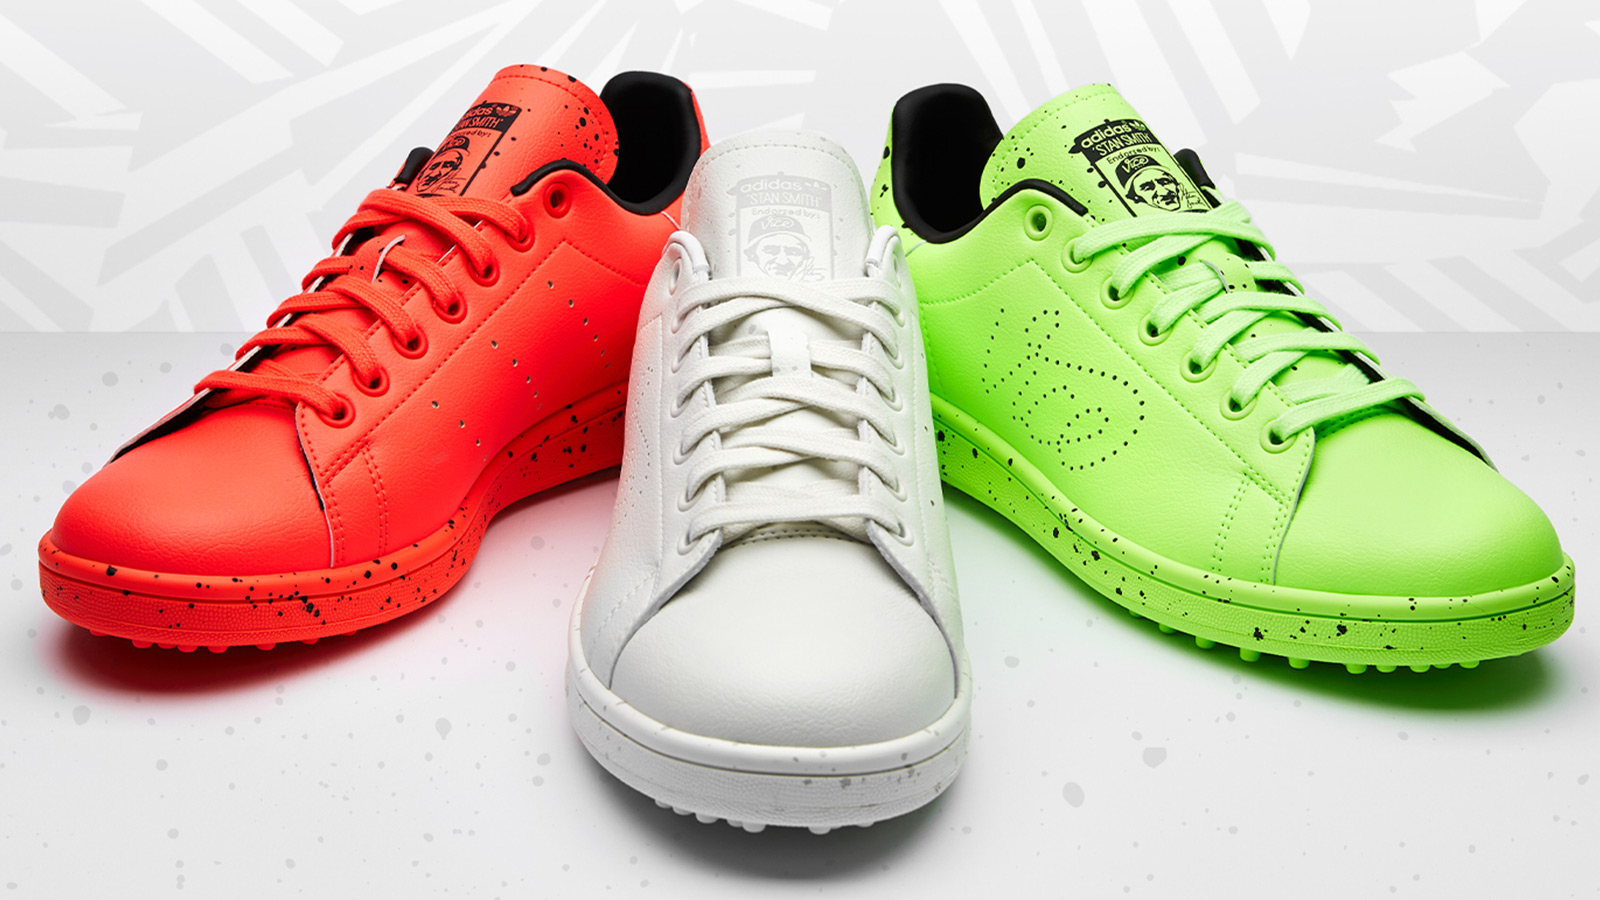 Stan Smith x Vice Golf Limited Edition